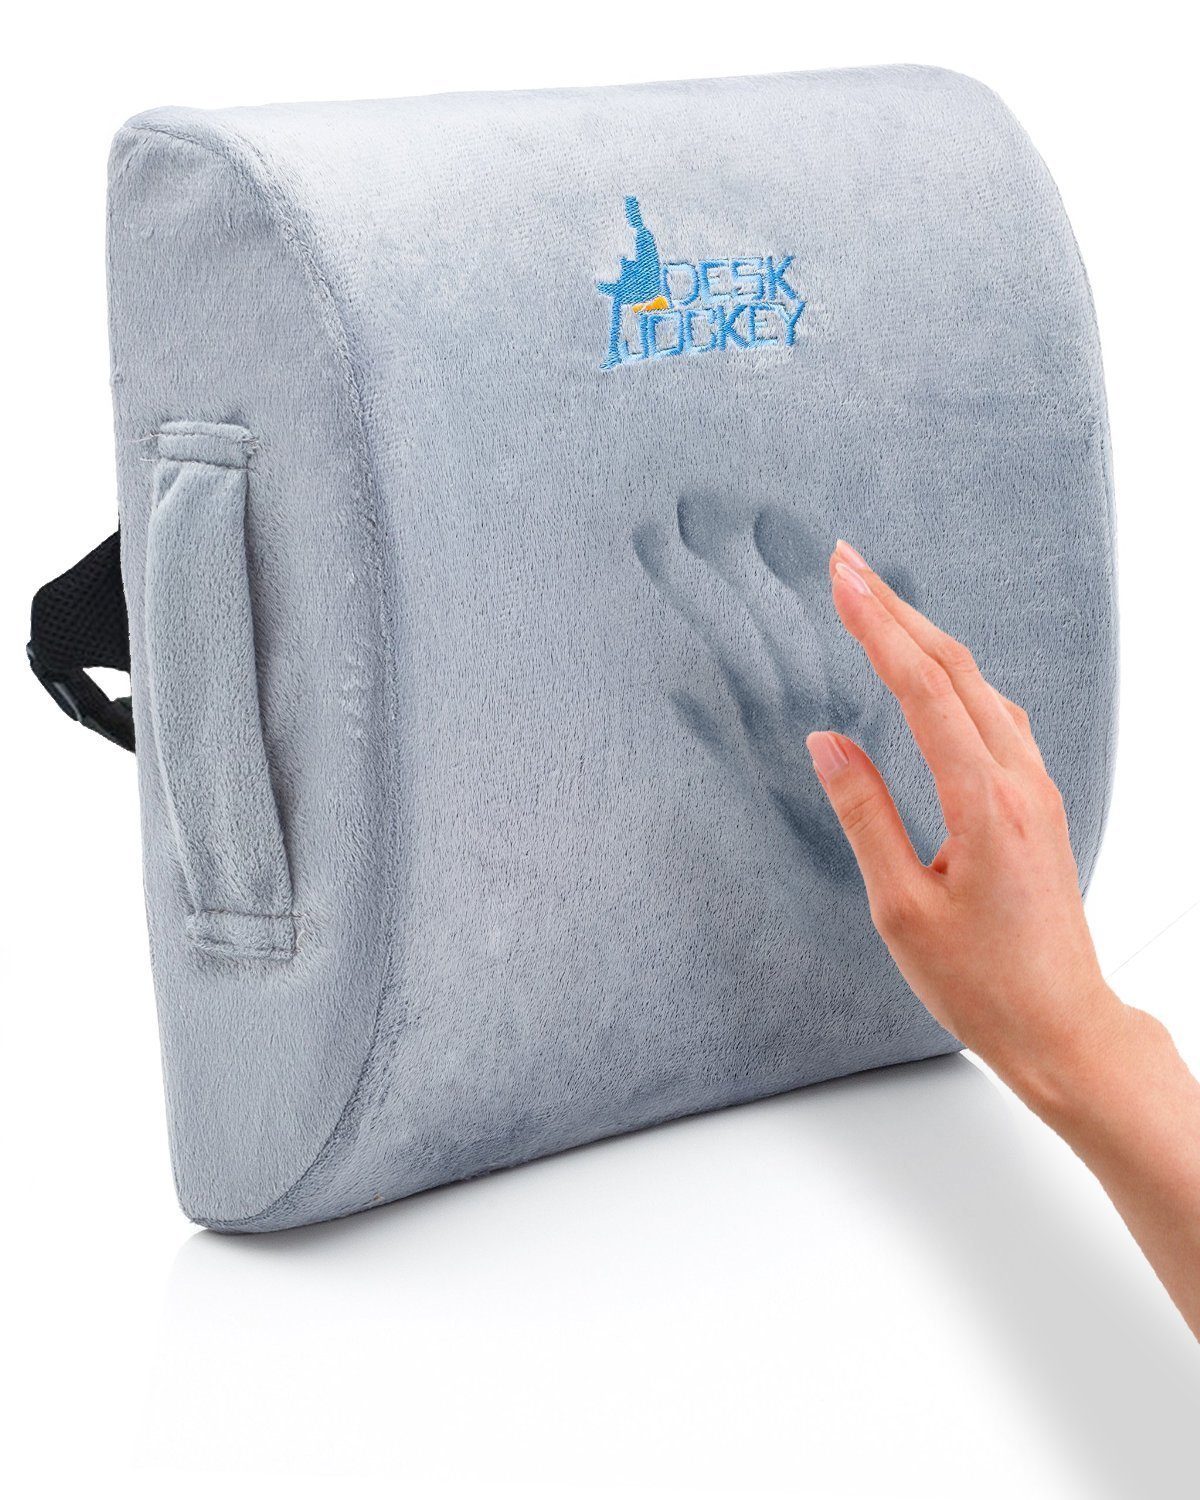 10 Best Back Support Pillows That All Desk Workers Need